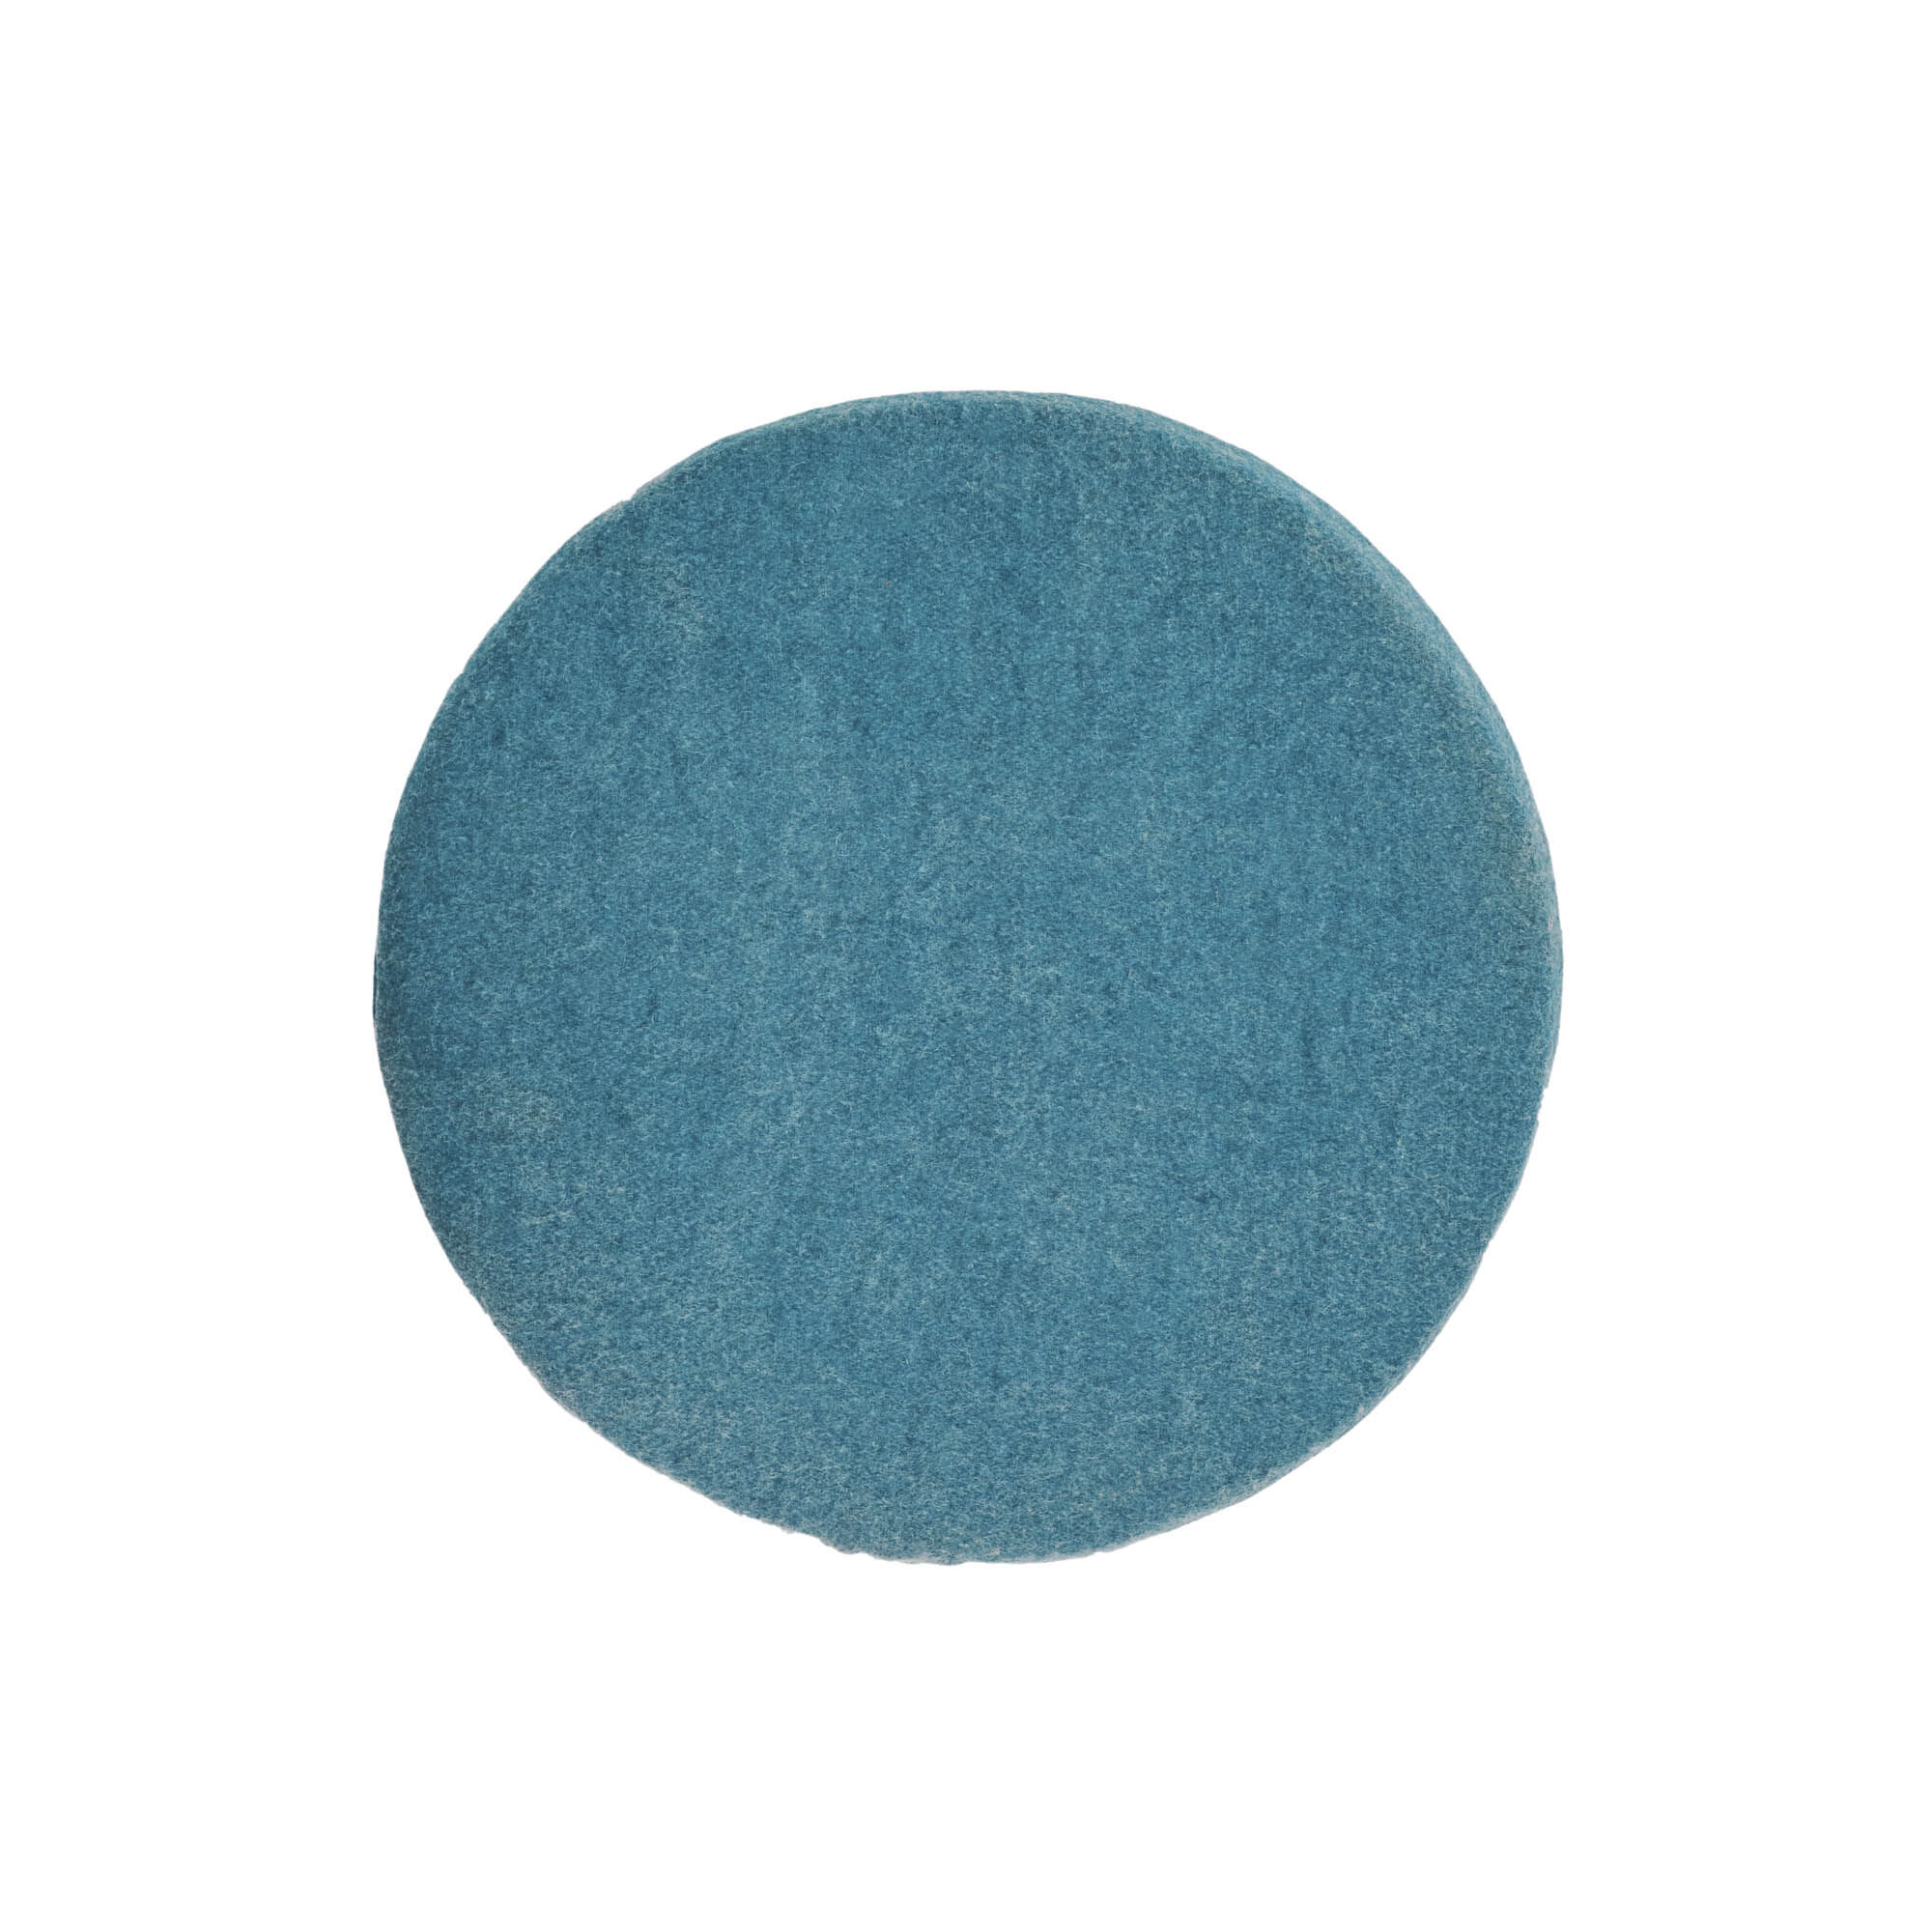 Kave Home Biasina round 100% wool chair cushion in blue Ø 35 cm